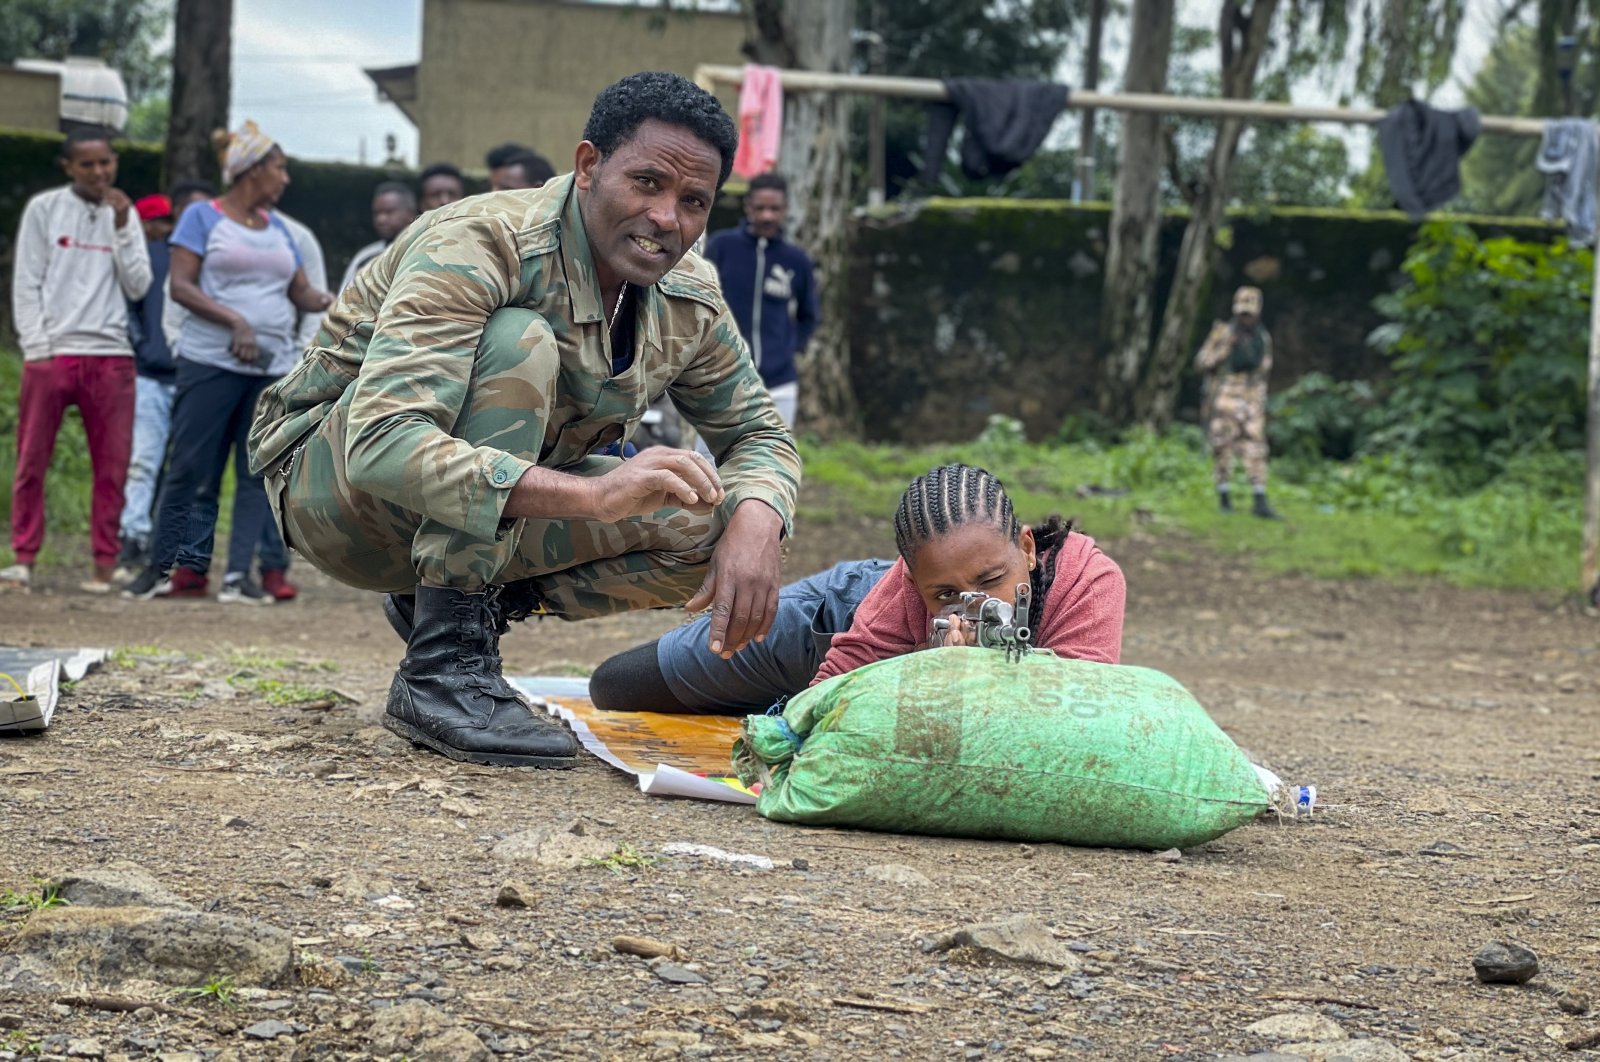 New volunteer Mekdess Muluneh Asayehegn (R) and others receive basic training to become potential reinforcements for pro-government militias or military forces, in a school courtyard in Gondar, in the Amhara region of northern Ethiopia, Aug. 24, 2021. (AP Photo)